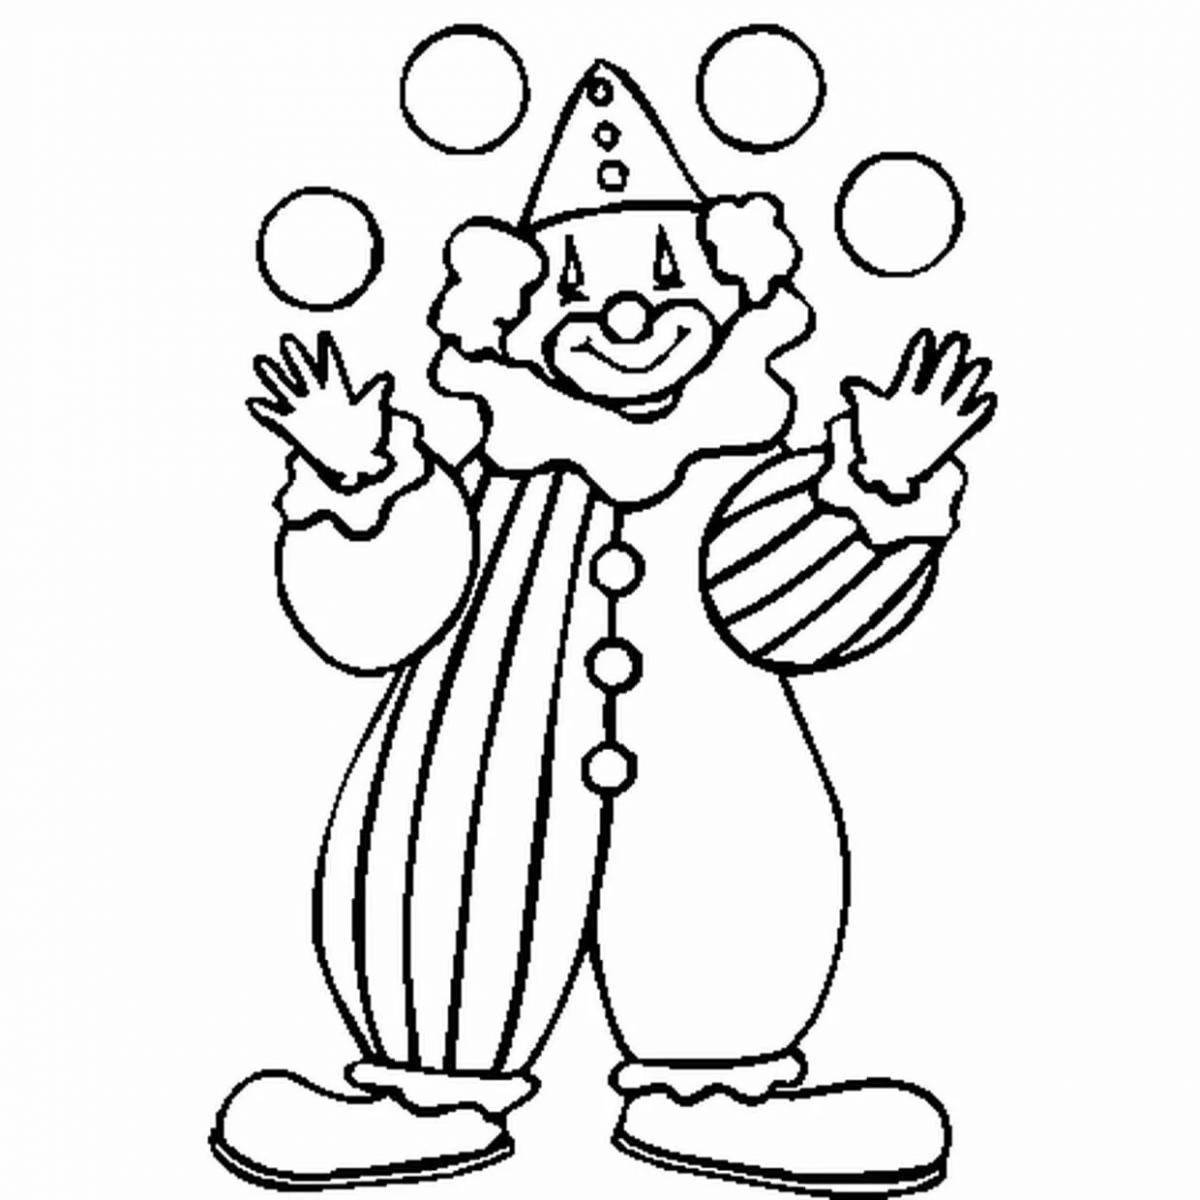 Sketch of a funny clown